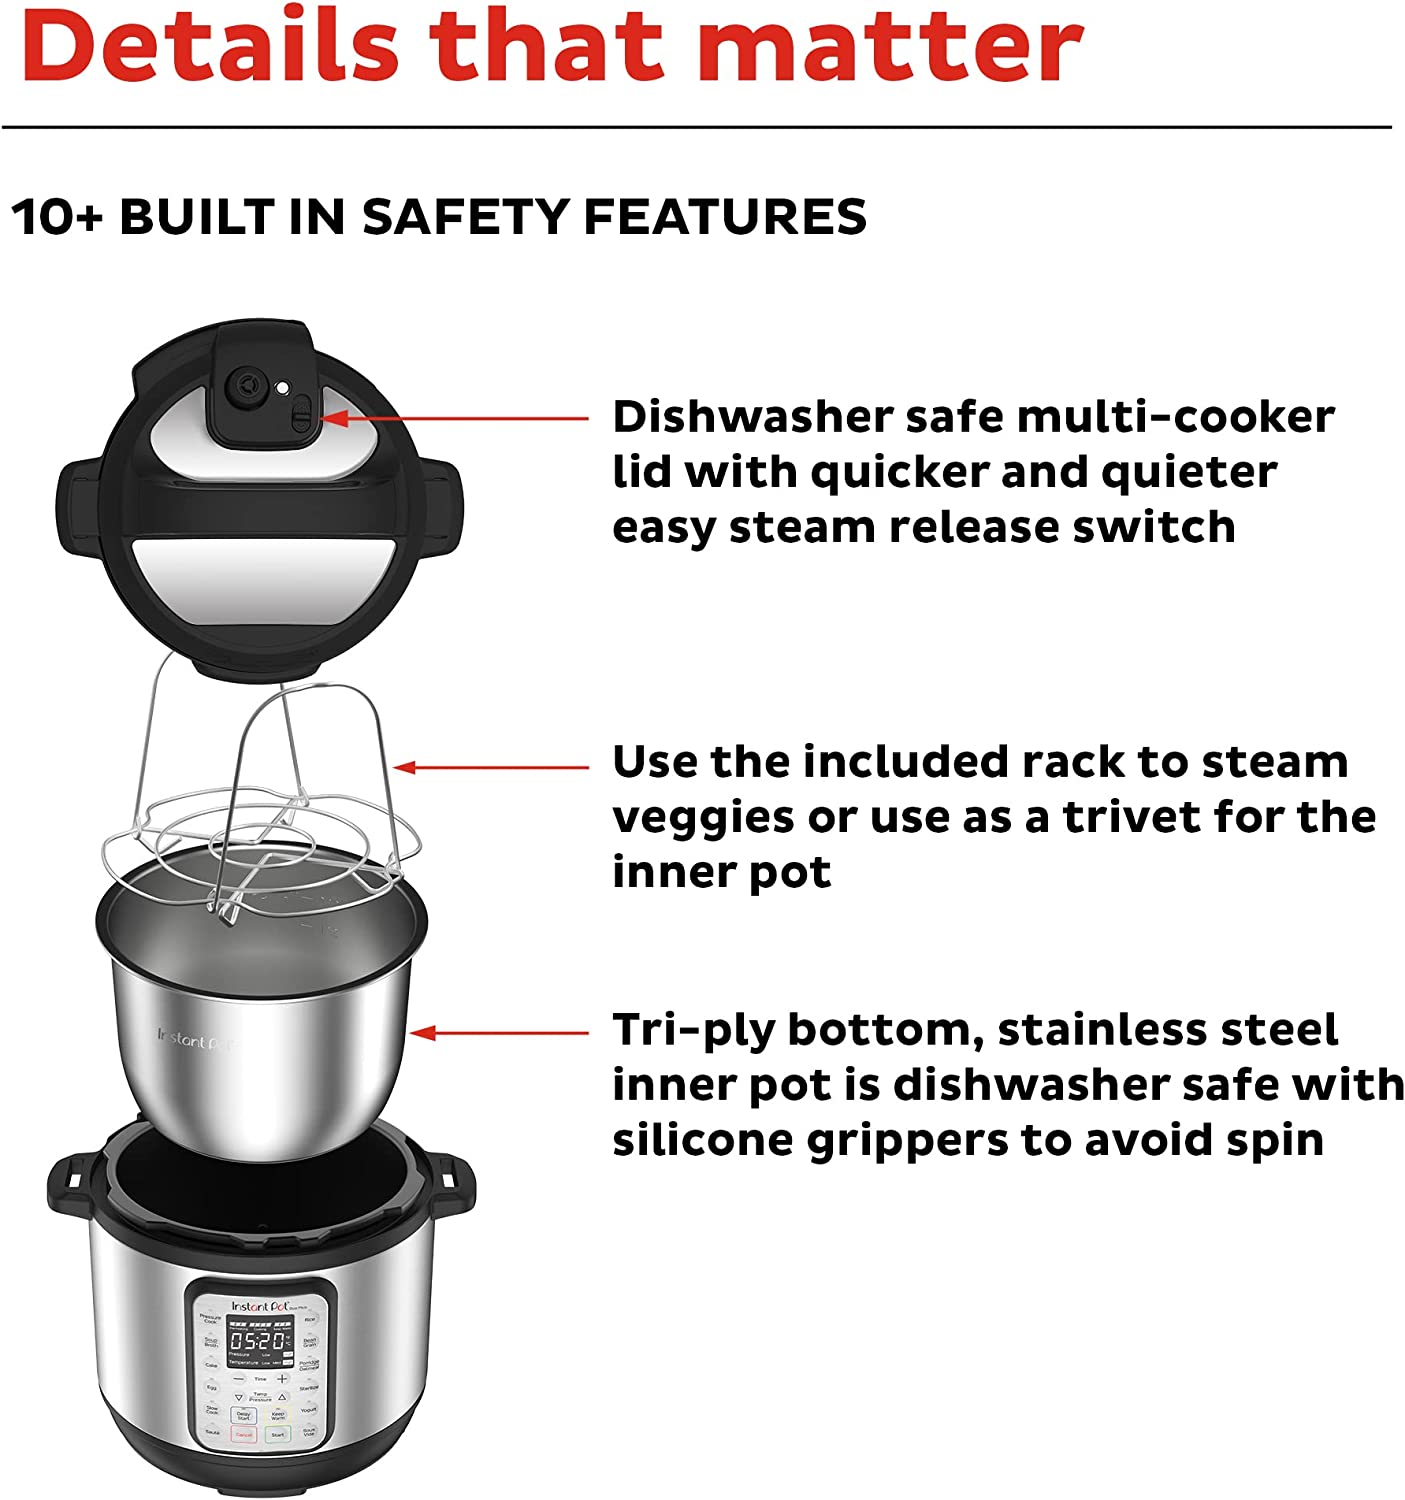 Instant Pot Duo Plus 9-in-1 Electric Pressure Cooker, Slow Cooker, Rice  Cooker, Steamer, Sauté, Yogurt Maker, Warmer & Sterilizer, Includes Free  App with over 1900 Recipes, Stainless Steel, 8 Quart